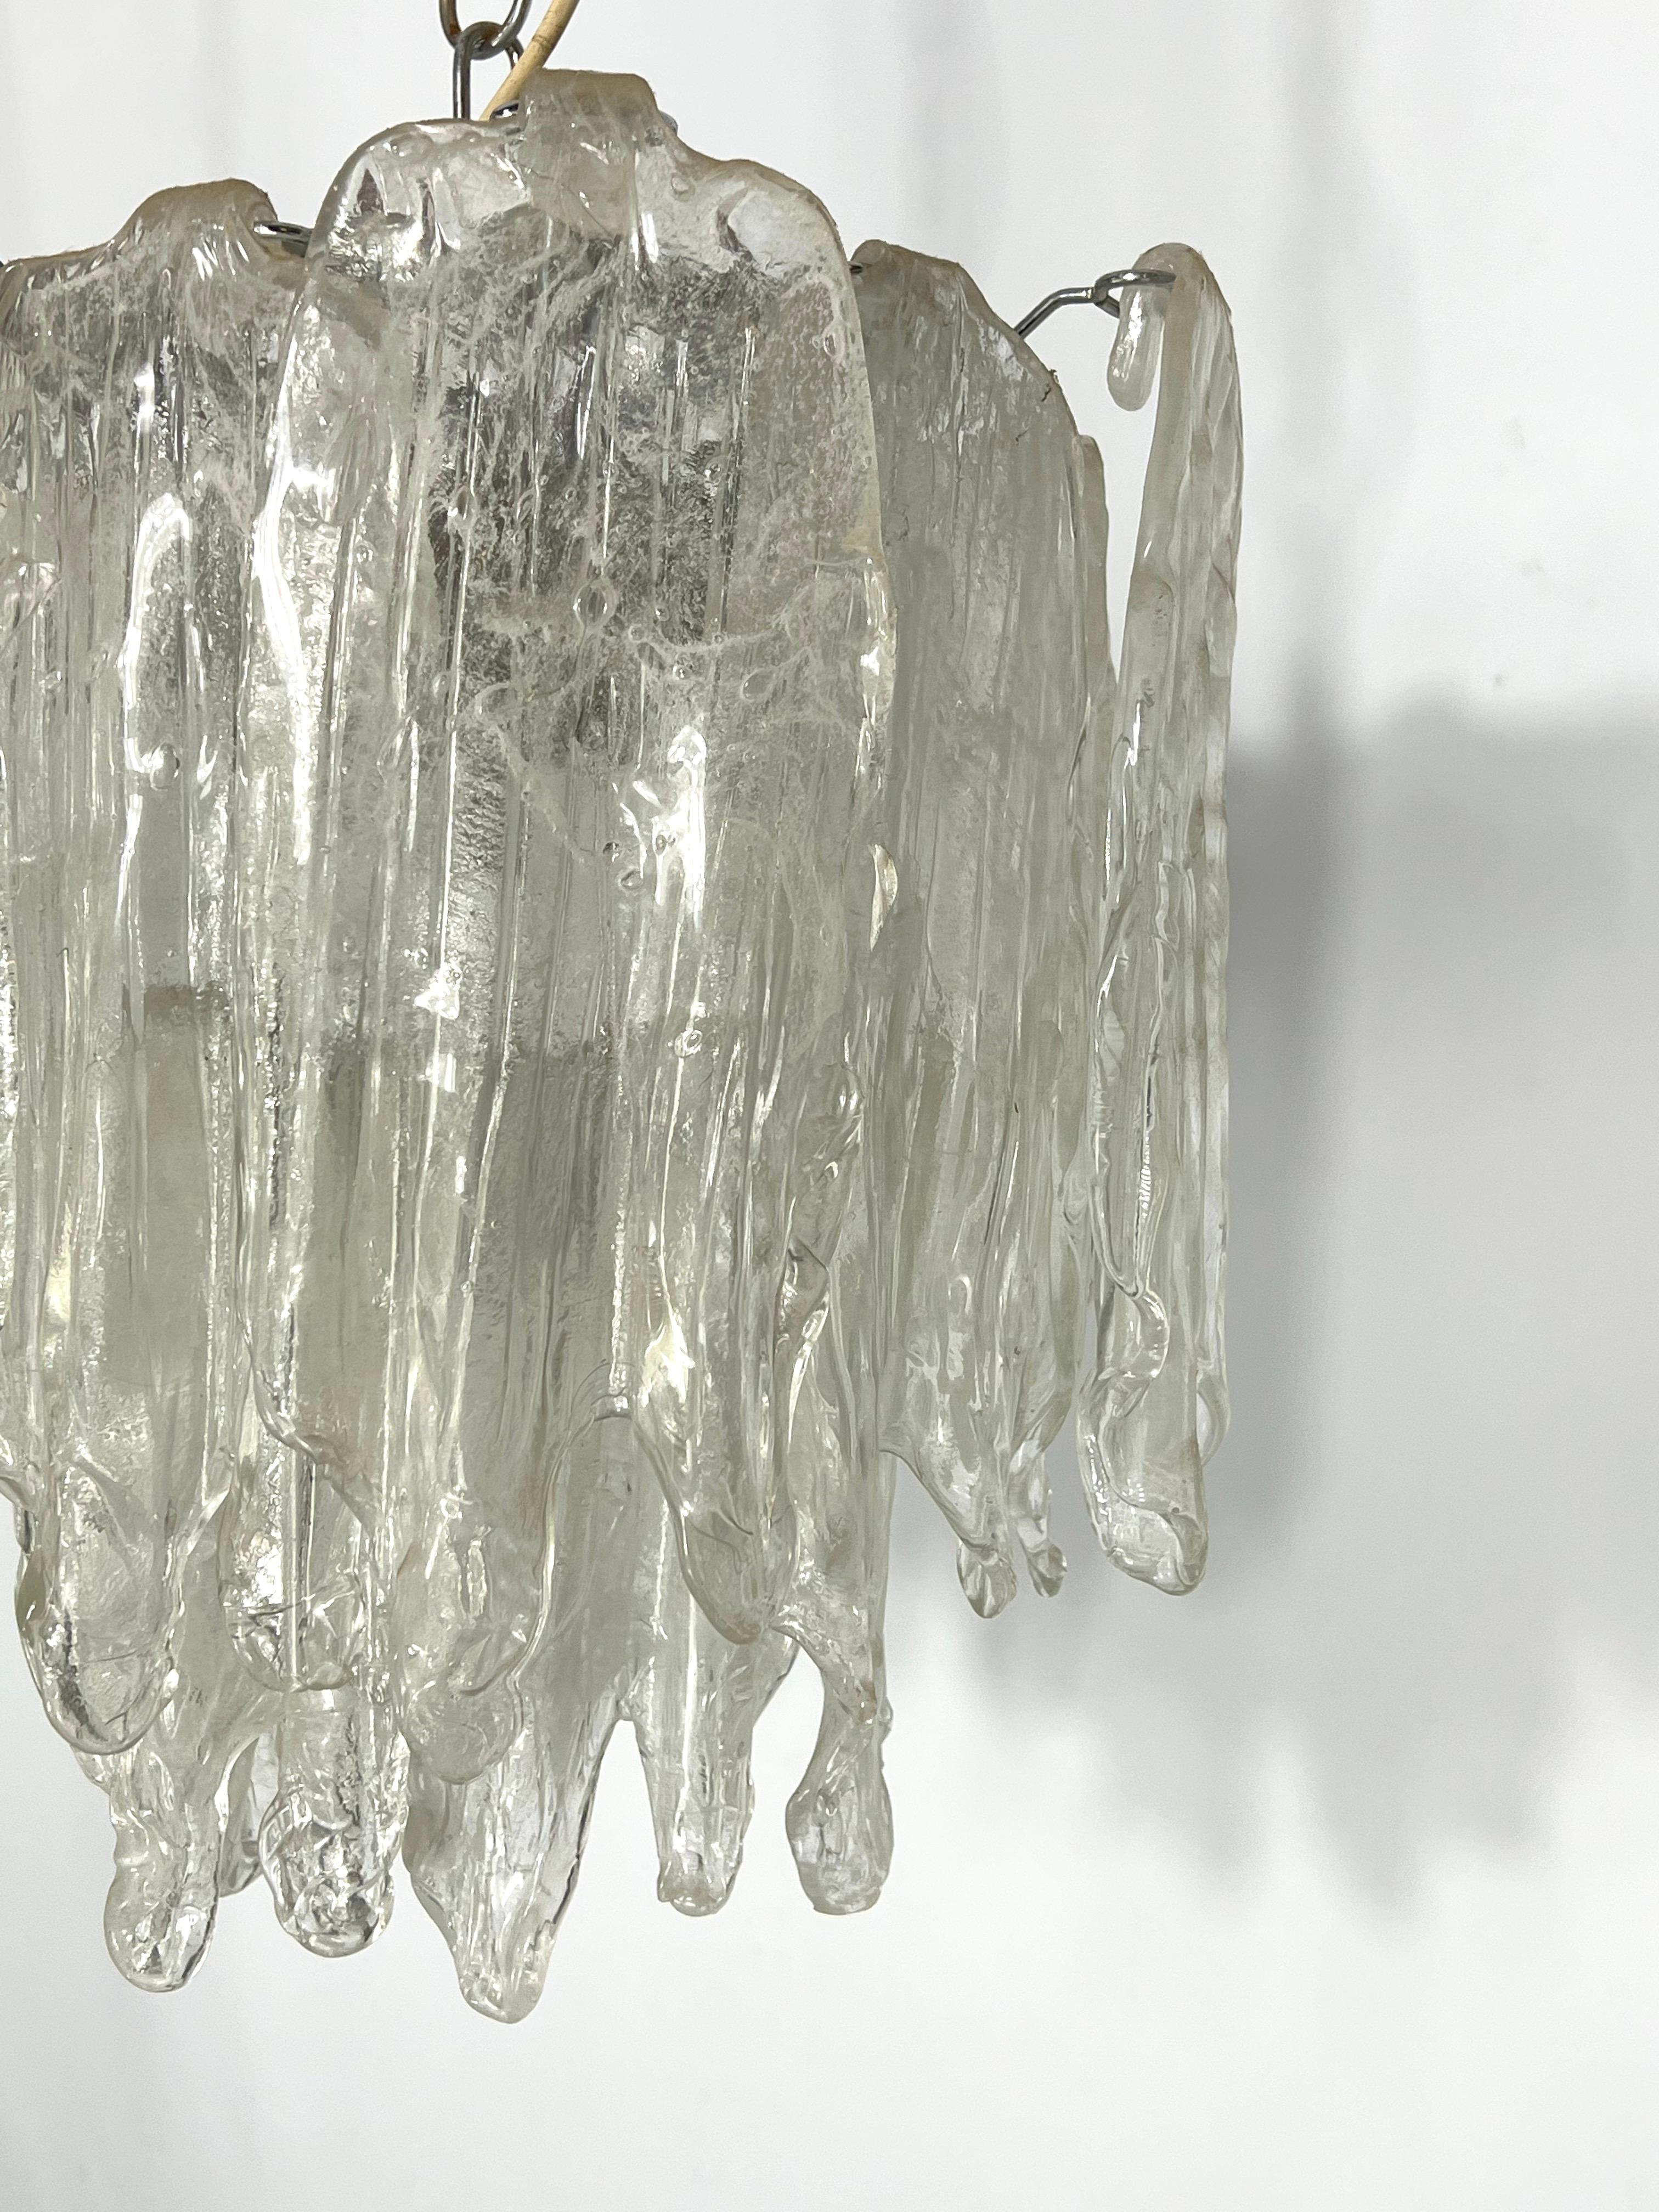 Mazzega Ice glass, pair of vintage murano chandeliers from 70s For Sale 11